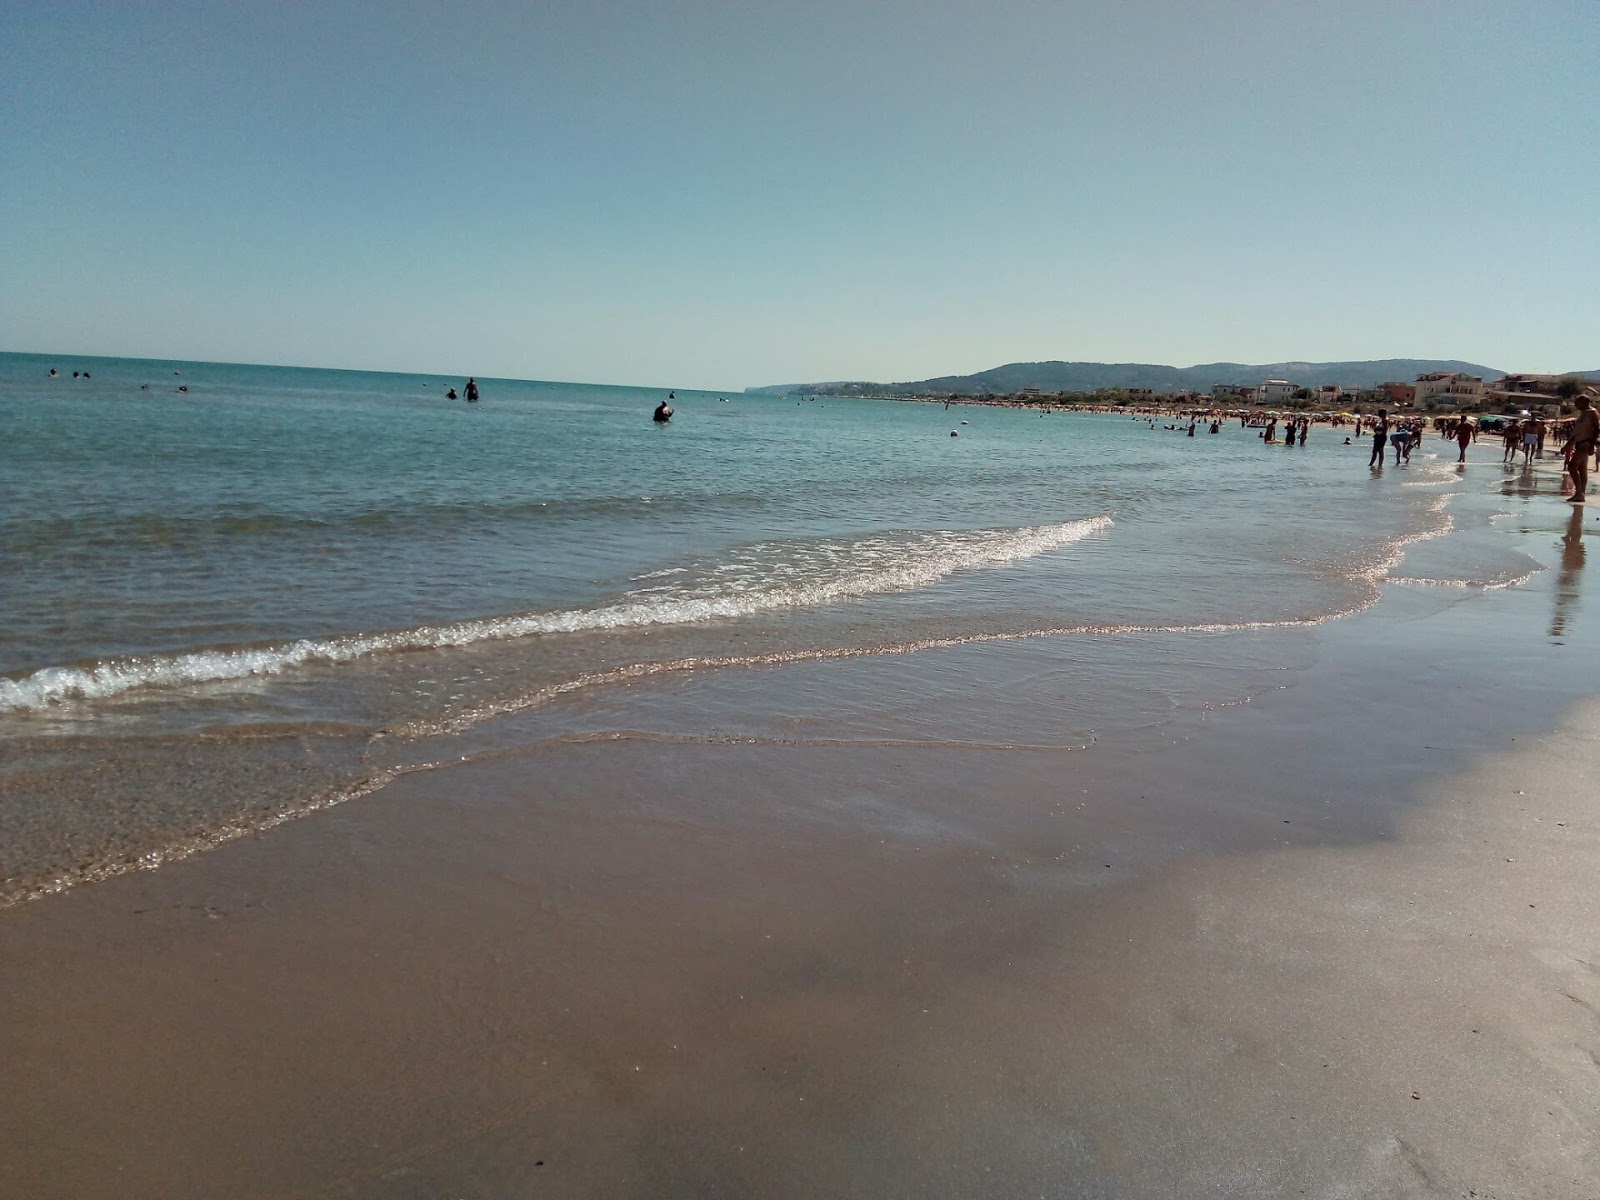 Photo of Spiaggia di Foce Varano - recommended for family travellers with kids